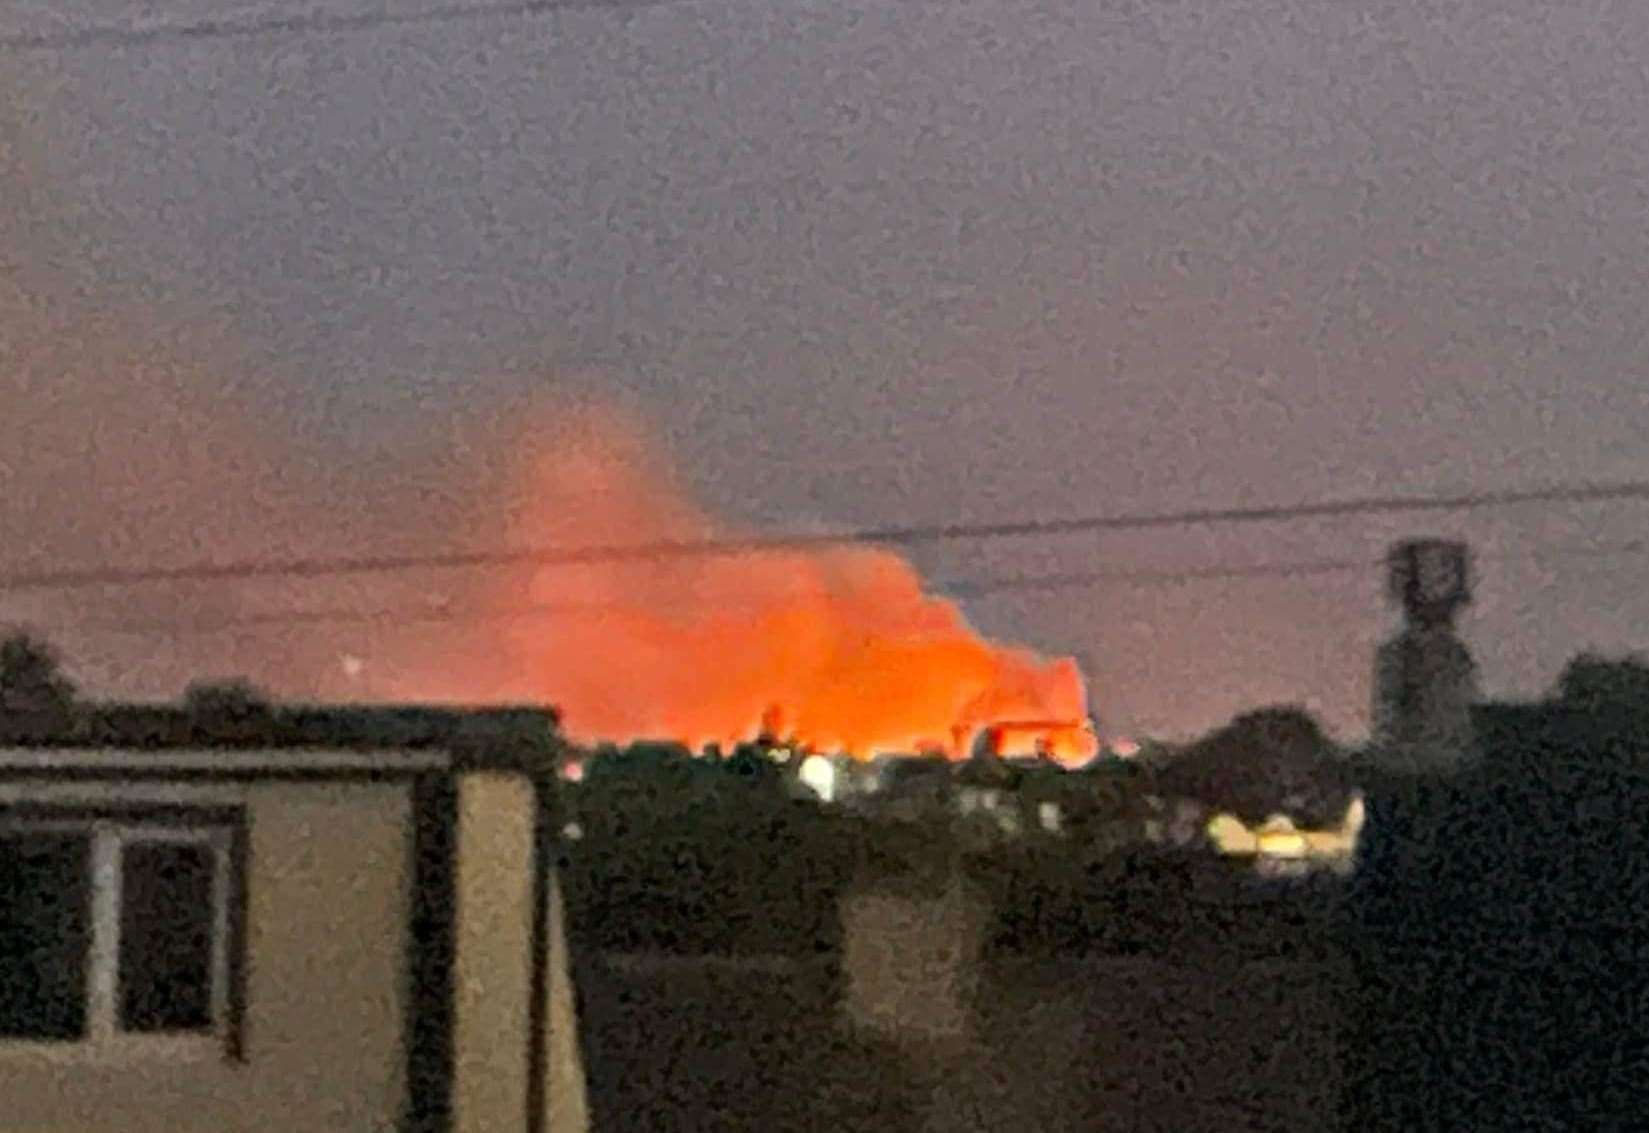 The fire on Dartford Heath was visible from much of Dartford. Picture by Megan Johnson